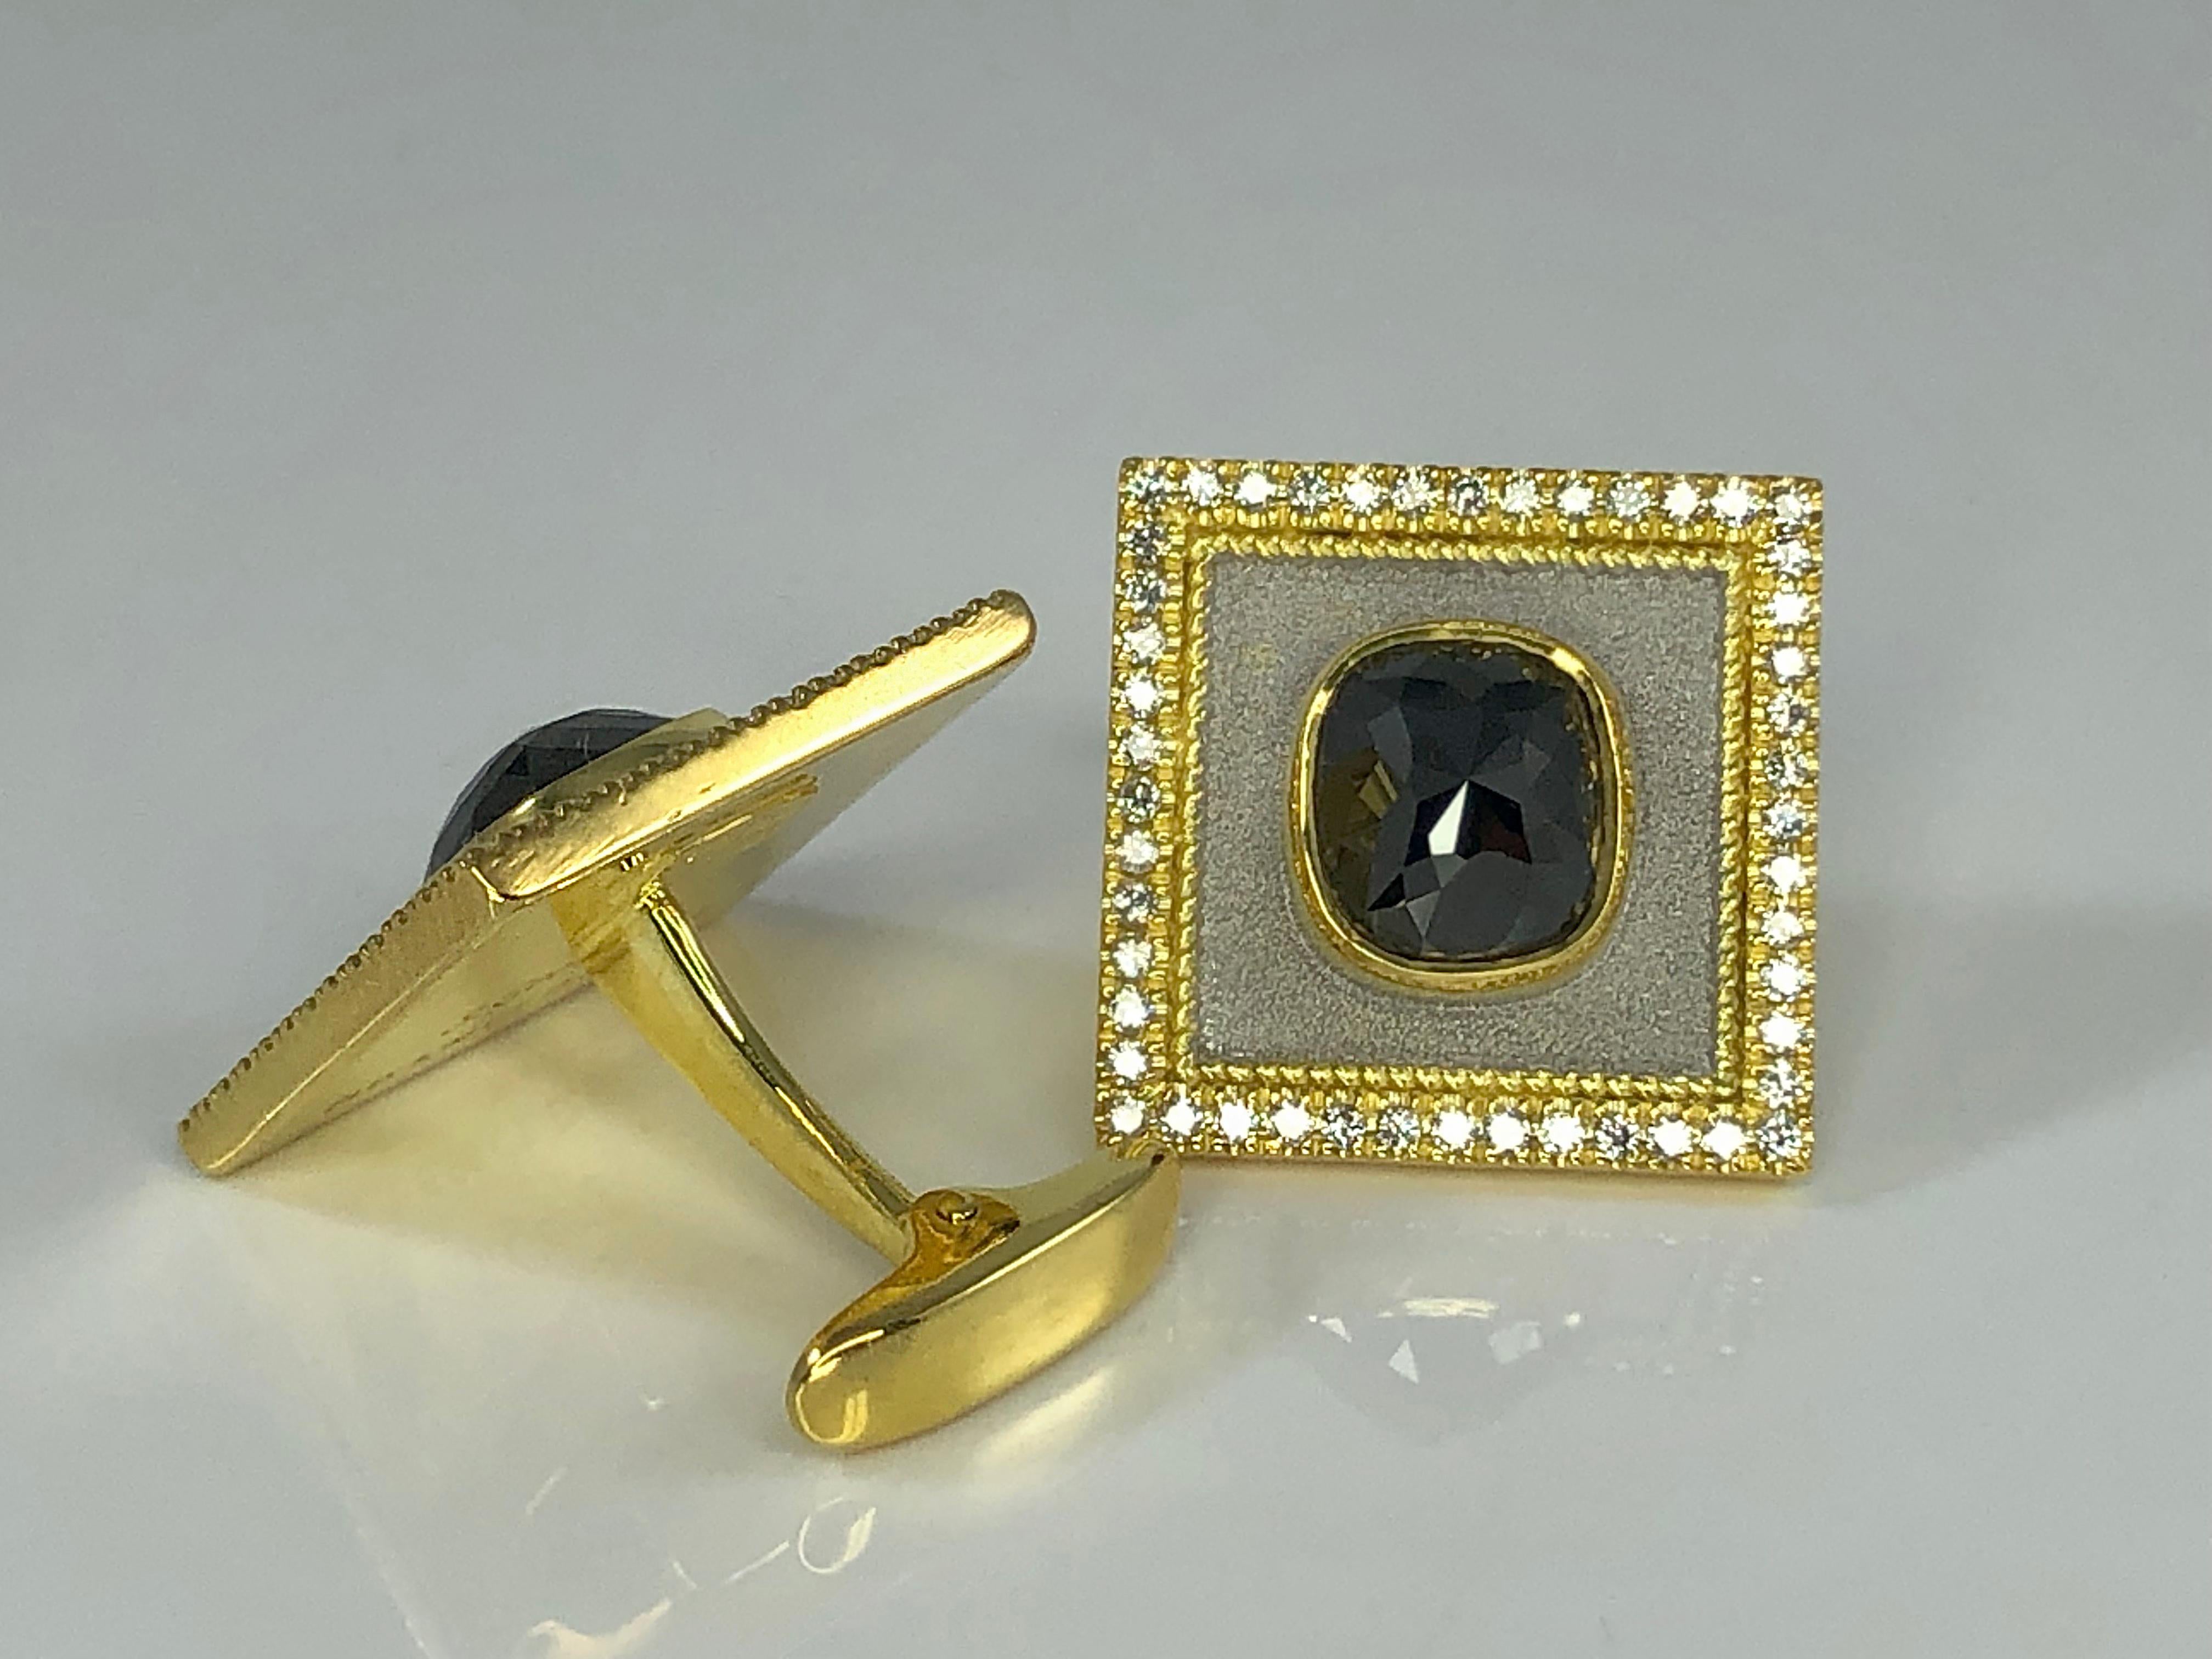 S.Georgios designer cufflinks handcrafted in Greece from 18 Karat yellow gold and decorated around the edges with brilliant-cut natural White Diamonds with a total weight of 0.94 Carat and two (2) Rose-cut Black Diamonds both a total weight of 5.96